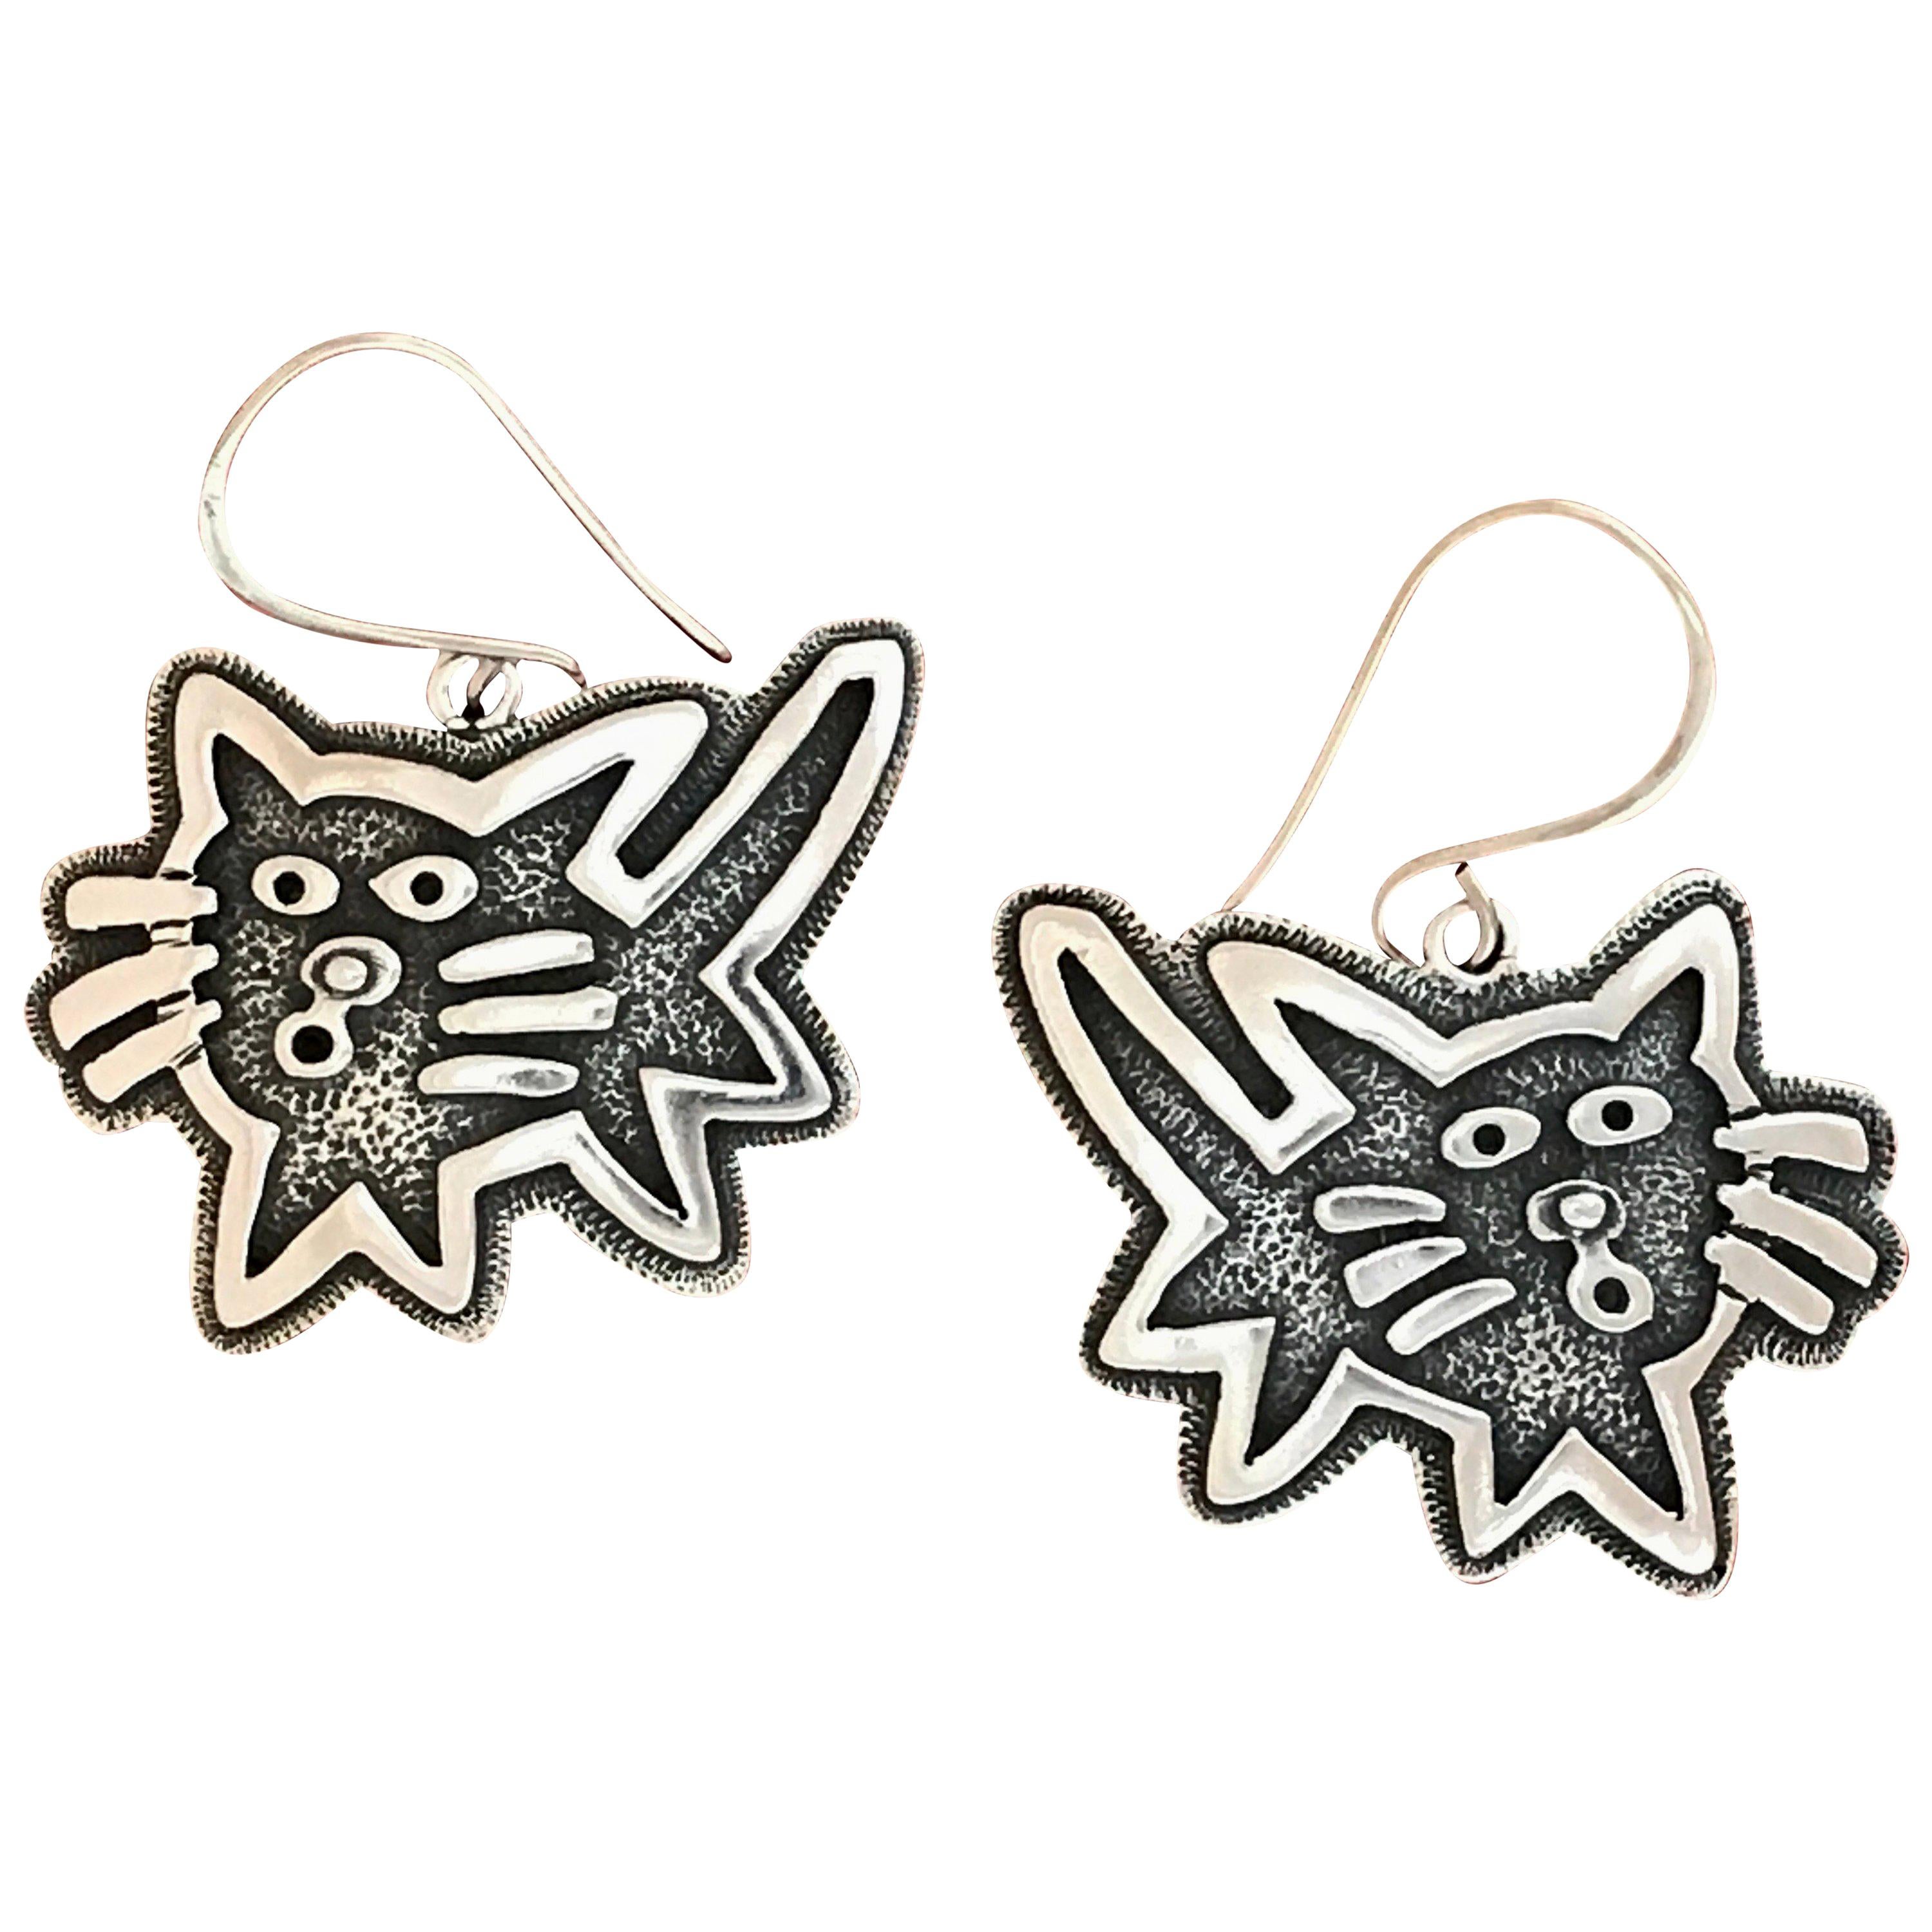 Kitty earrings cast sterling silver Melanie Yazzie dangle cats contemporary
Sterling Silver casting  Melanie A. Yazzie (Navajo-Diné) is a highly regarded multimedia artist known for her printmaking, paintings, sculpture, and jewelry designs. She has